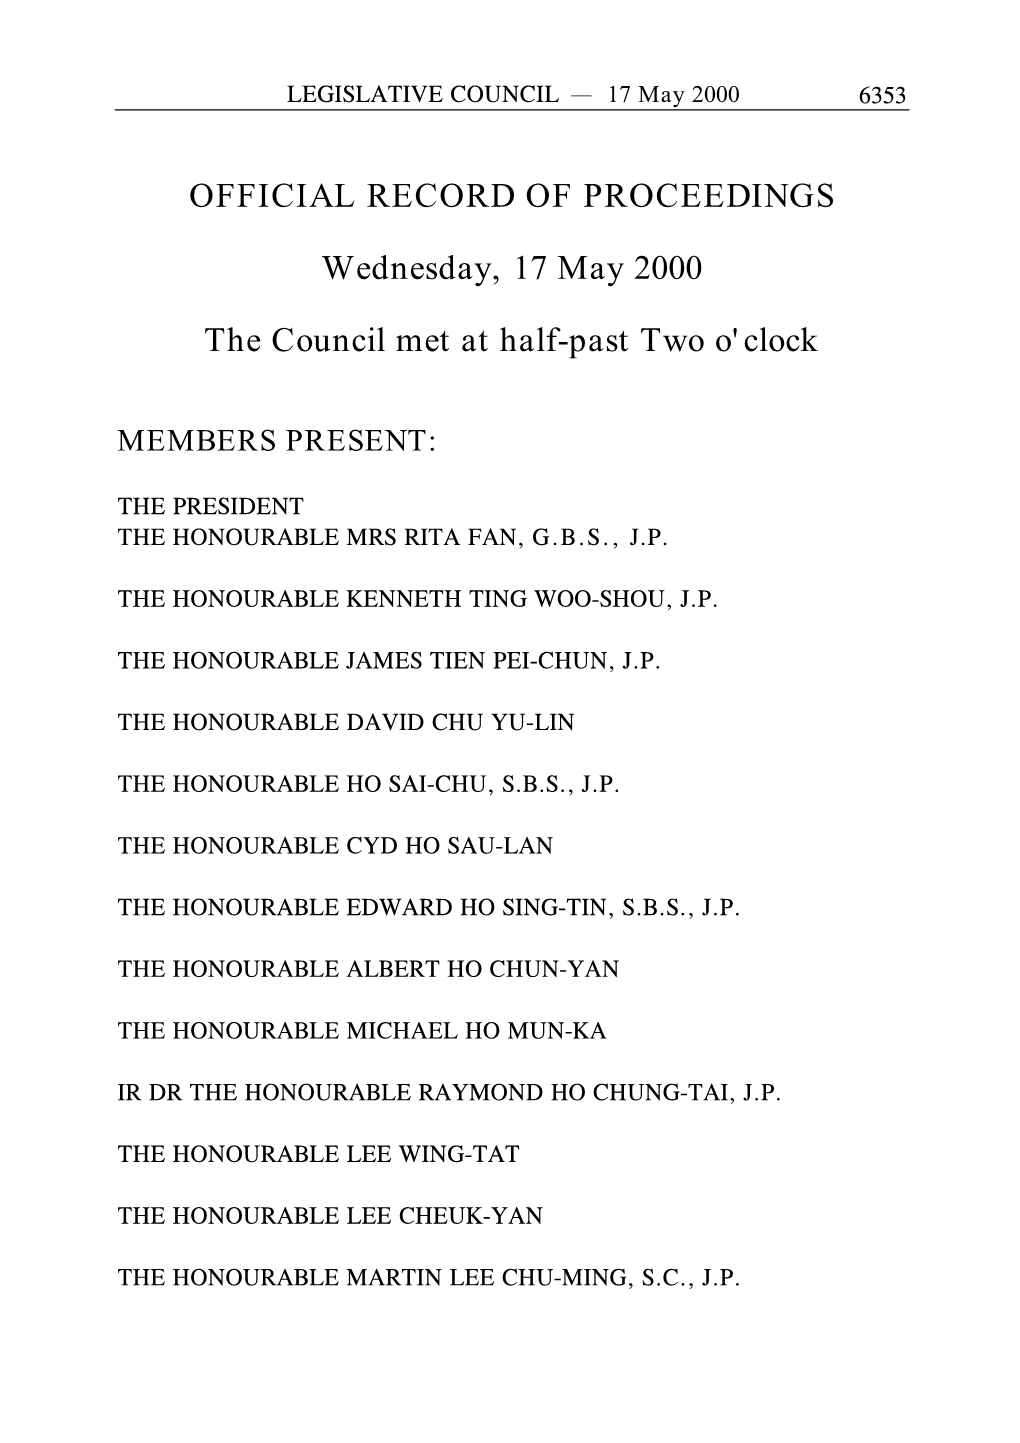 OFFICIAL RECORD of PROCEEDINGS Wednesday, 17